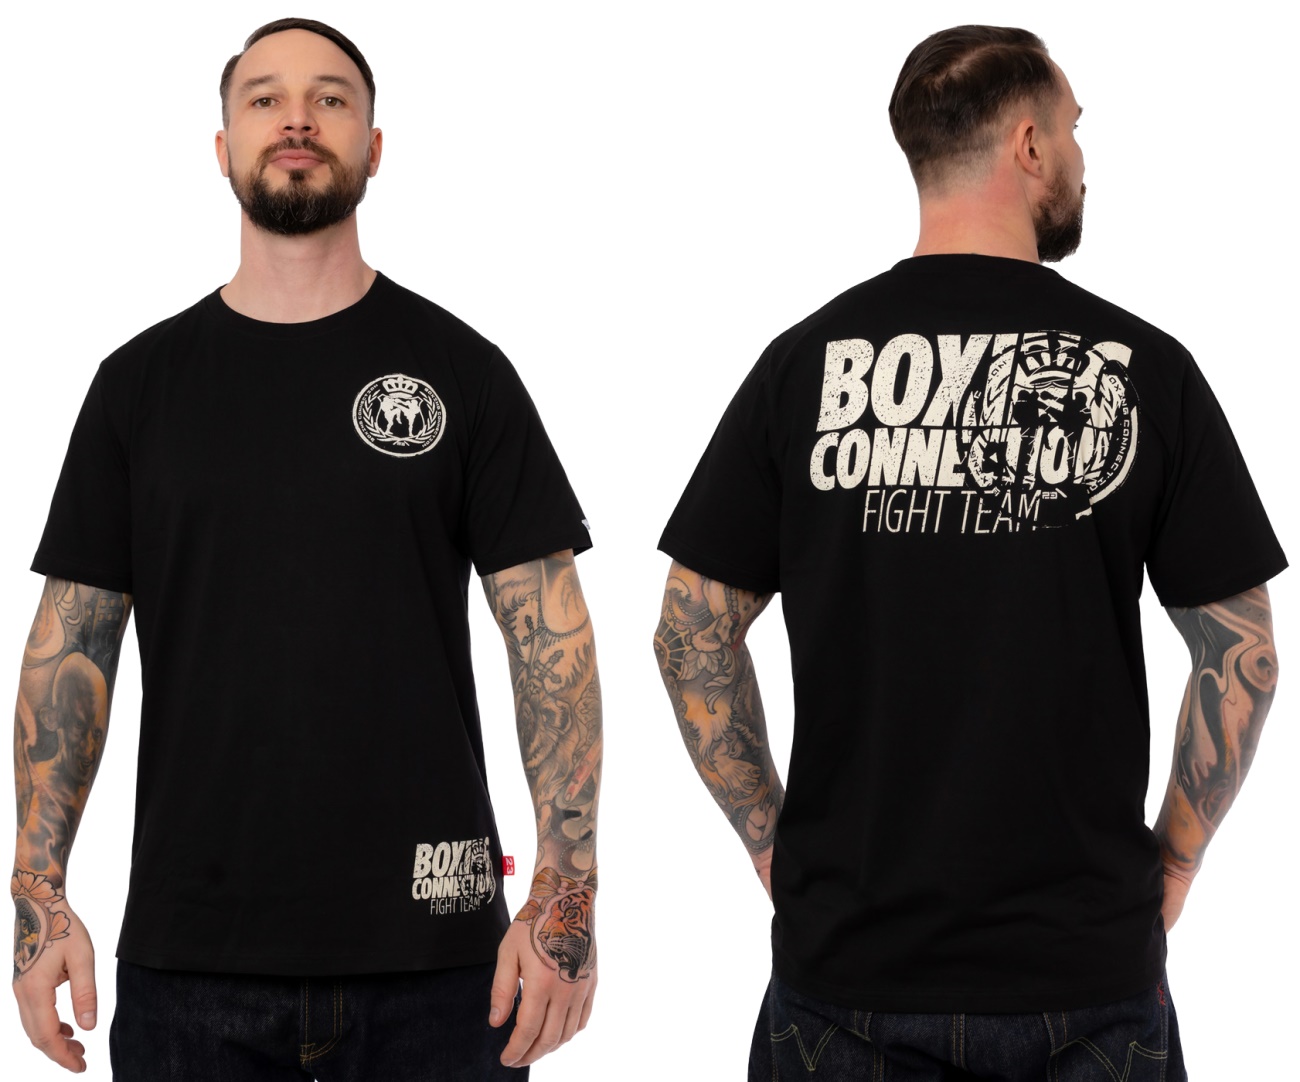 Boxing Connection Label 23 T-Shirt BC Fight Team - Label 23 Boxing Connection - Rascal Streetwear - Online-Shop - Details